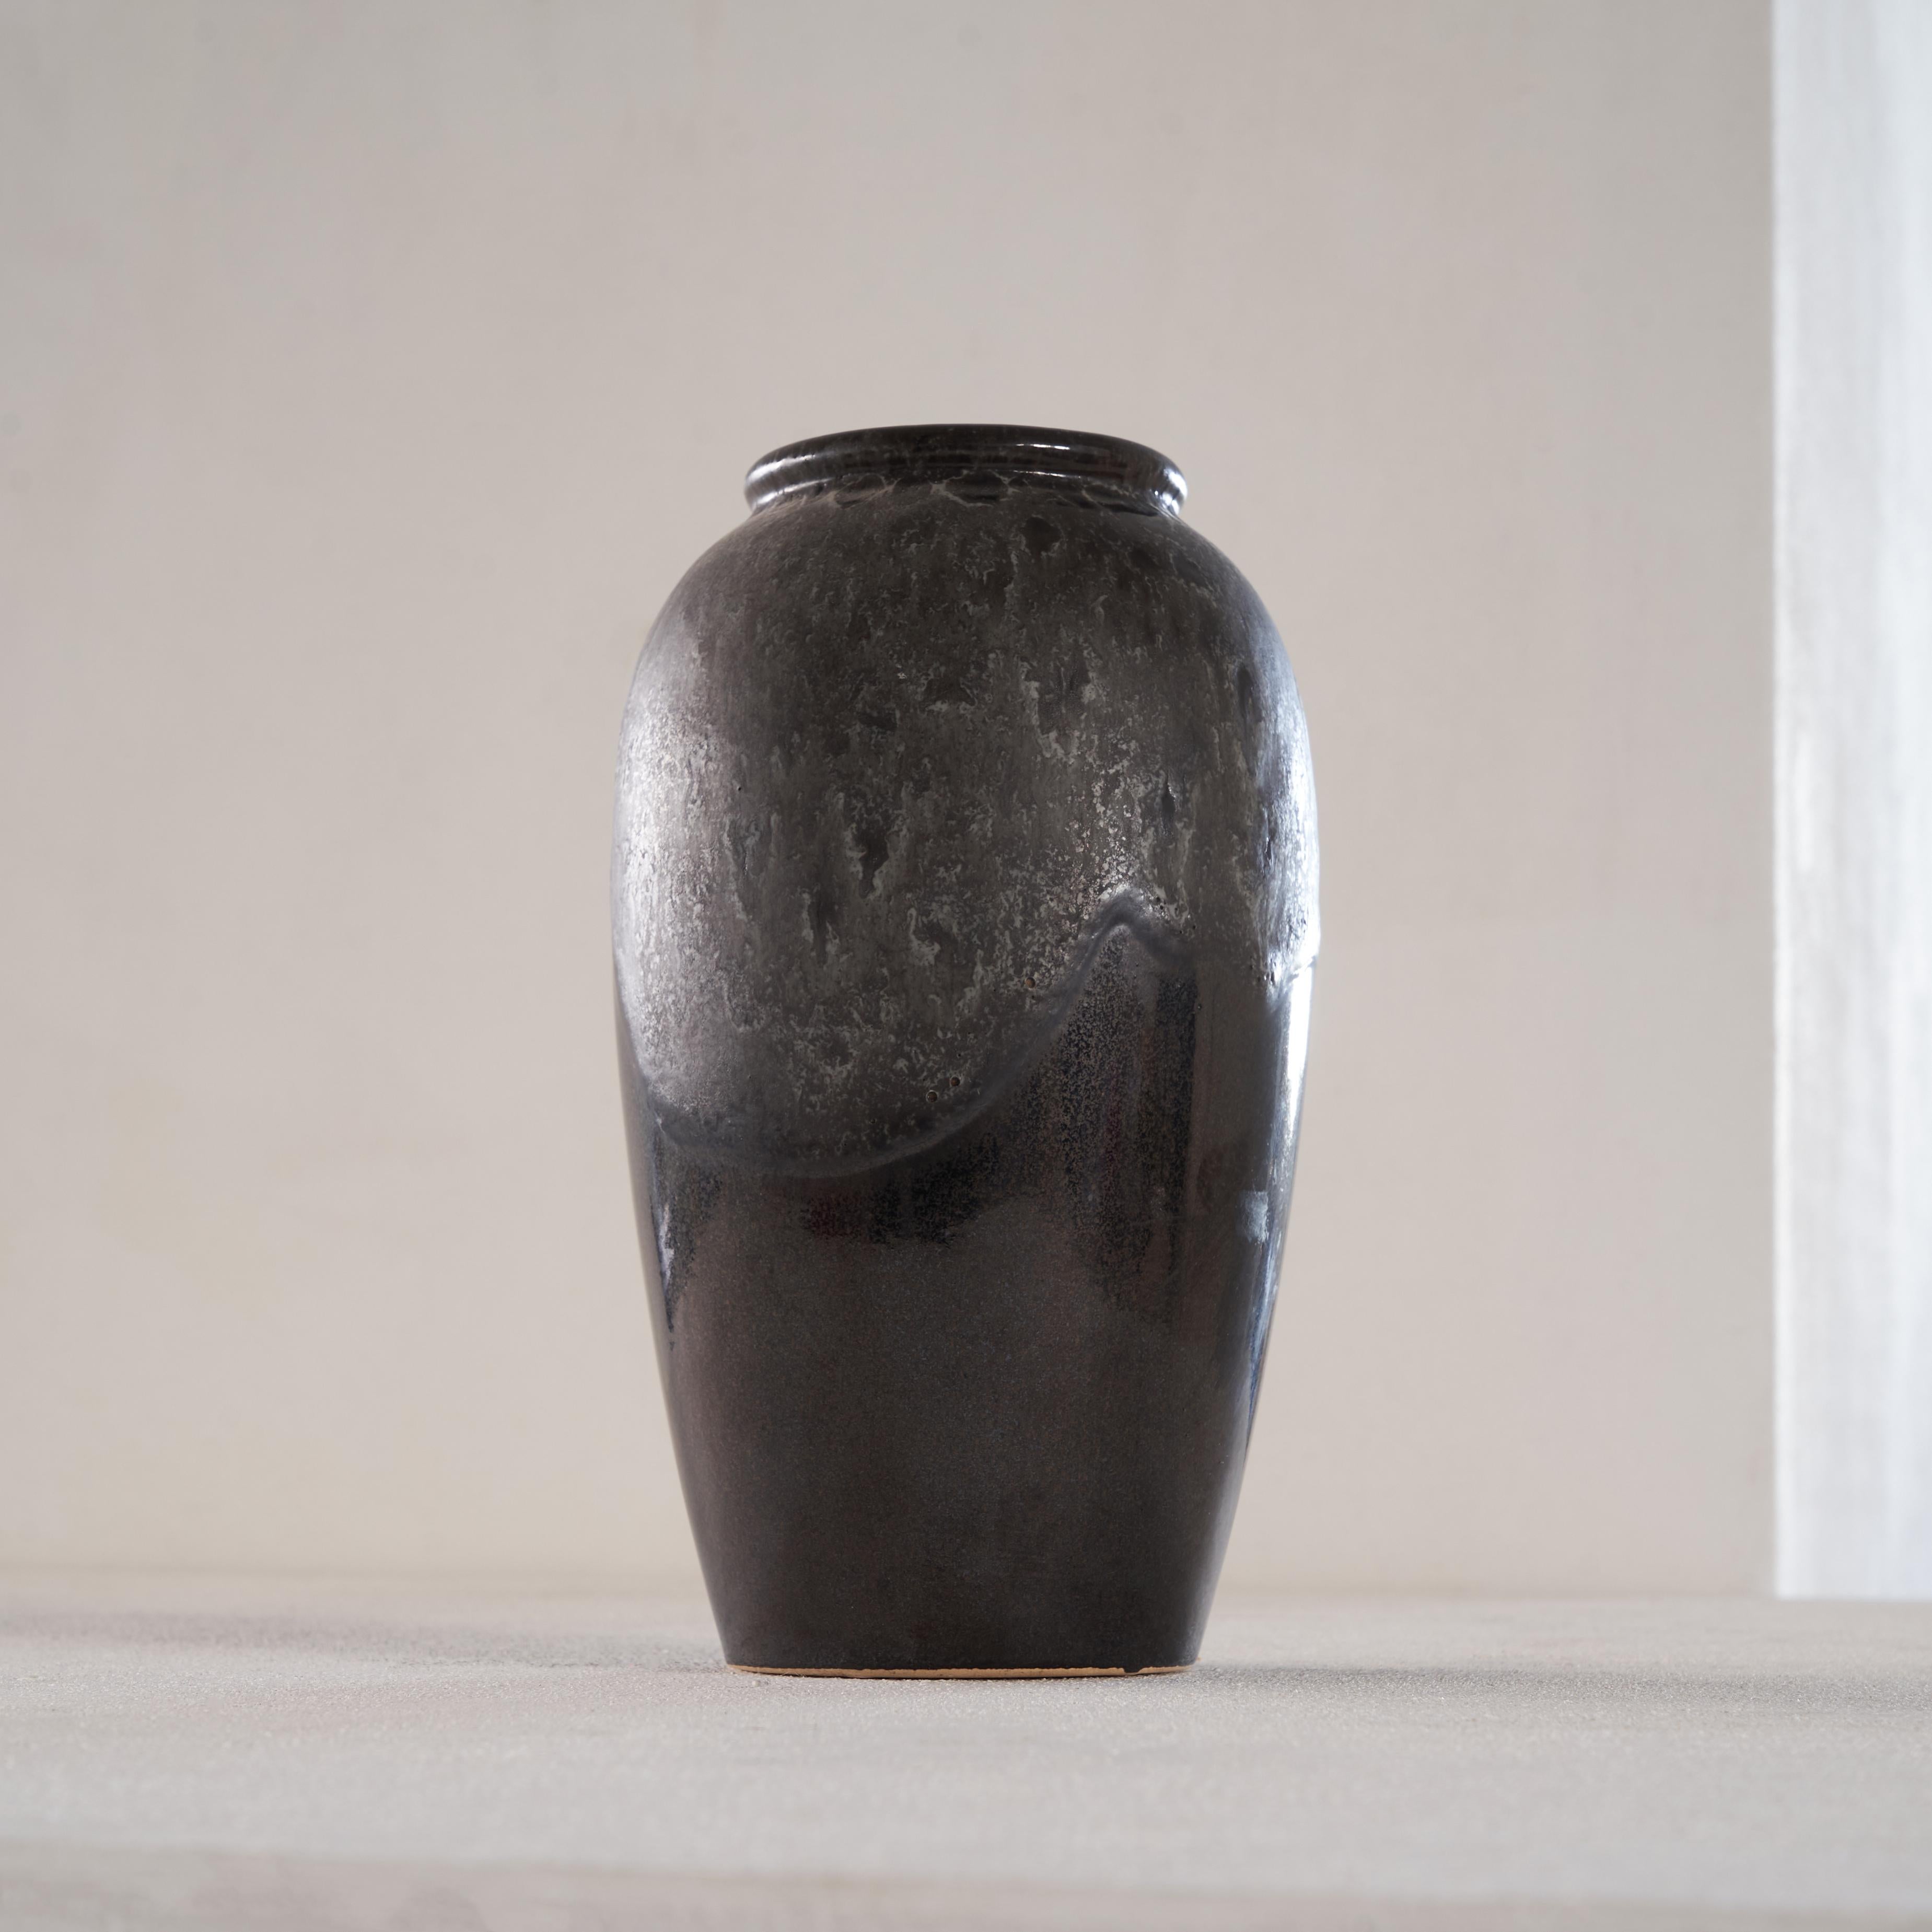 Painterly decorated anthracite mid century pottery vase, Germany, 1960s.

Very rich glazed pottery vase in warm gray and anthracite tones with a hint of metallic. Very elegant and painterly decorated. Timeless and subtle shape with a classic rim